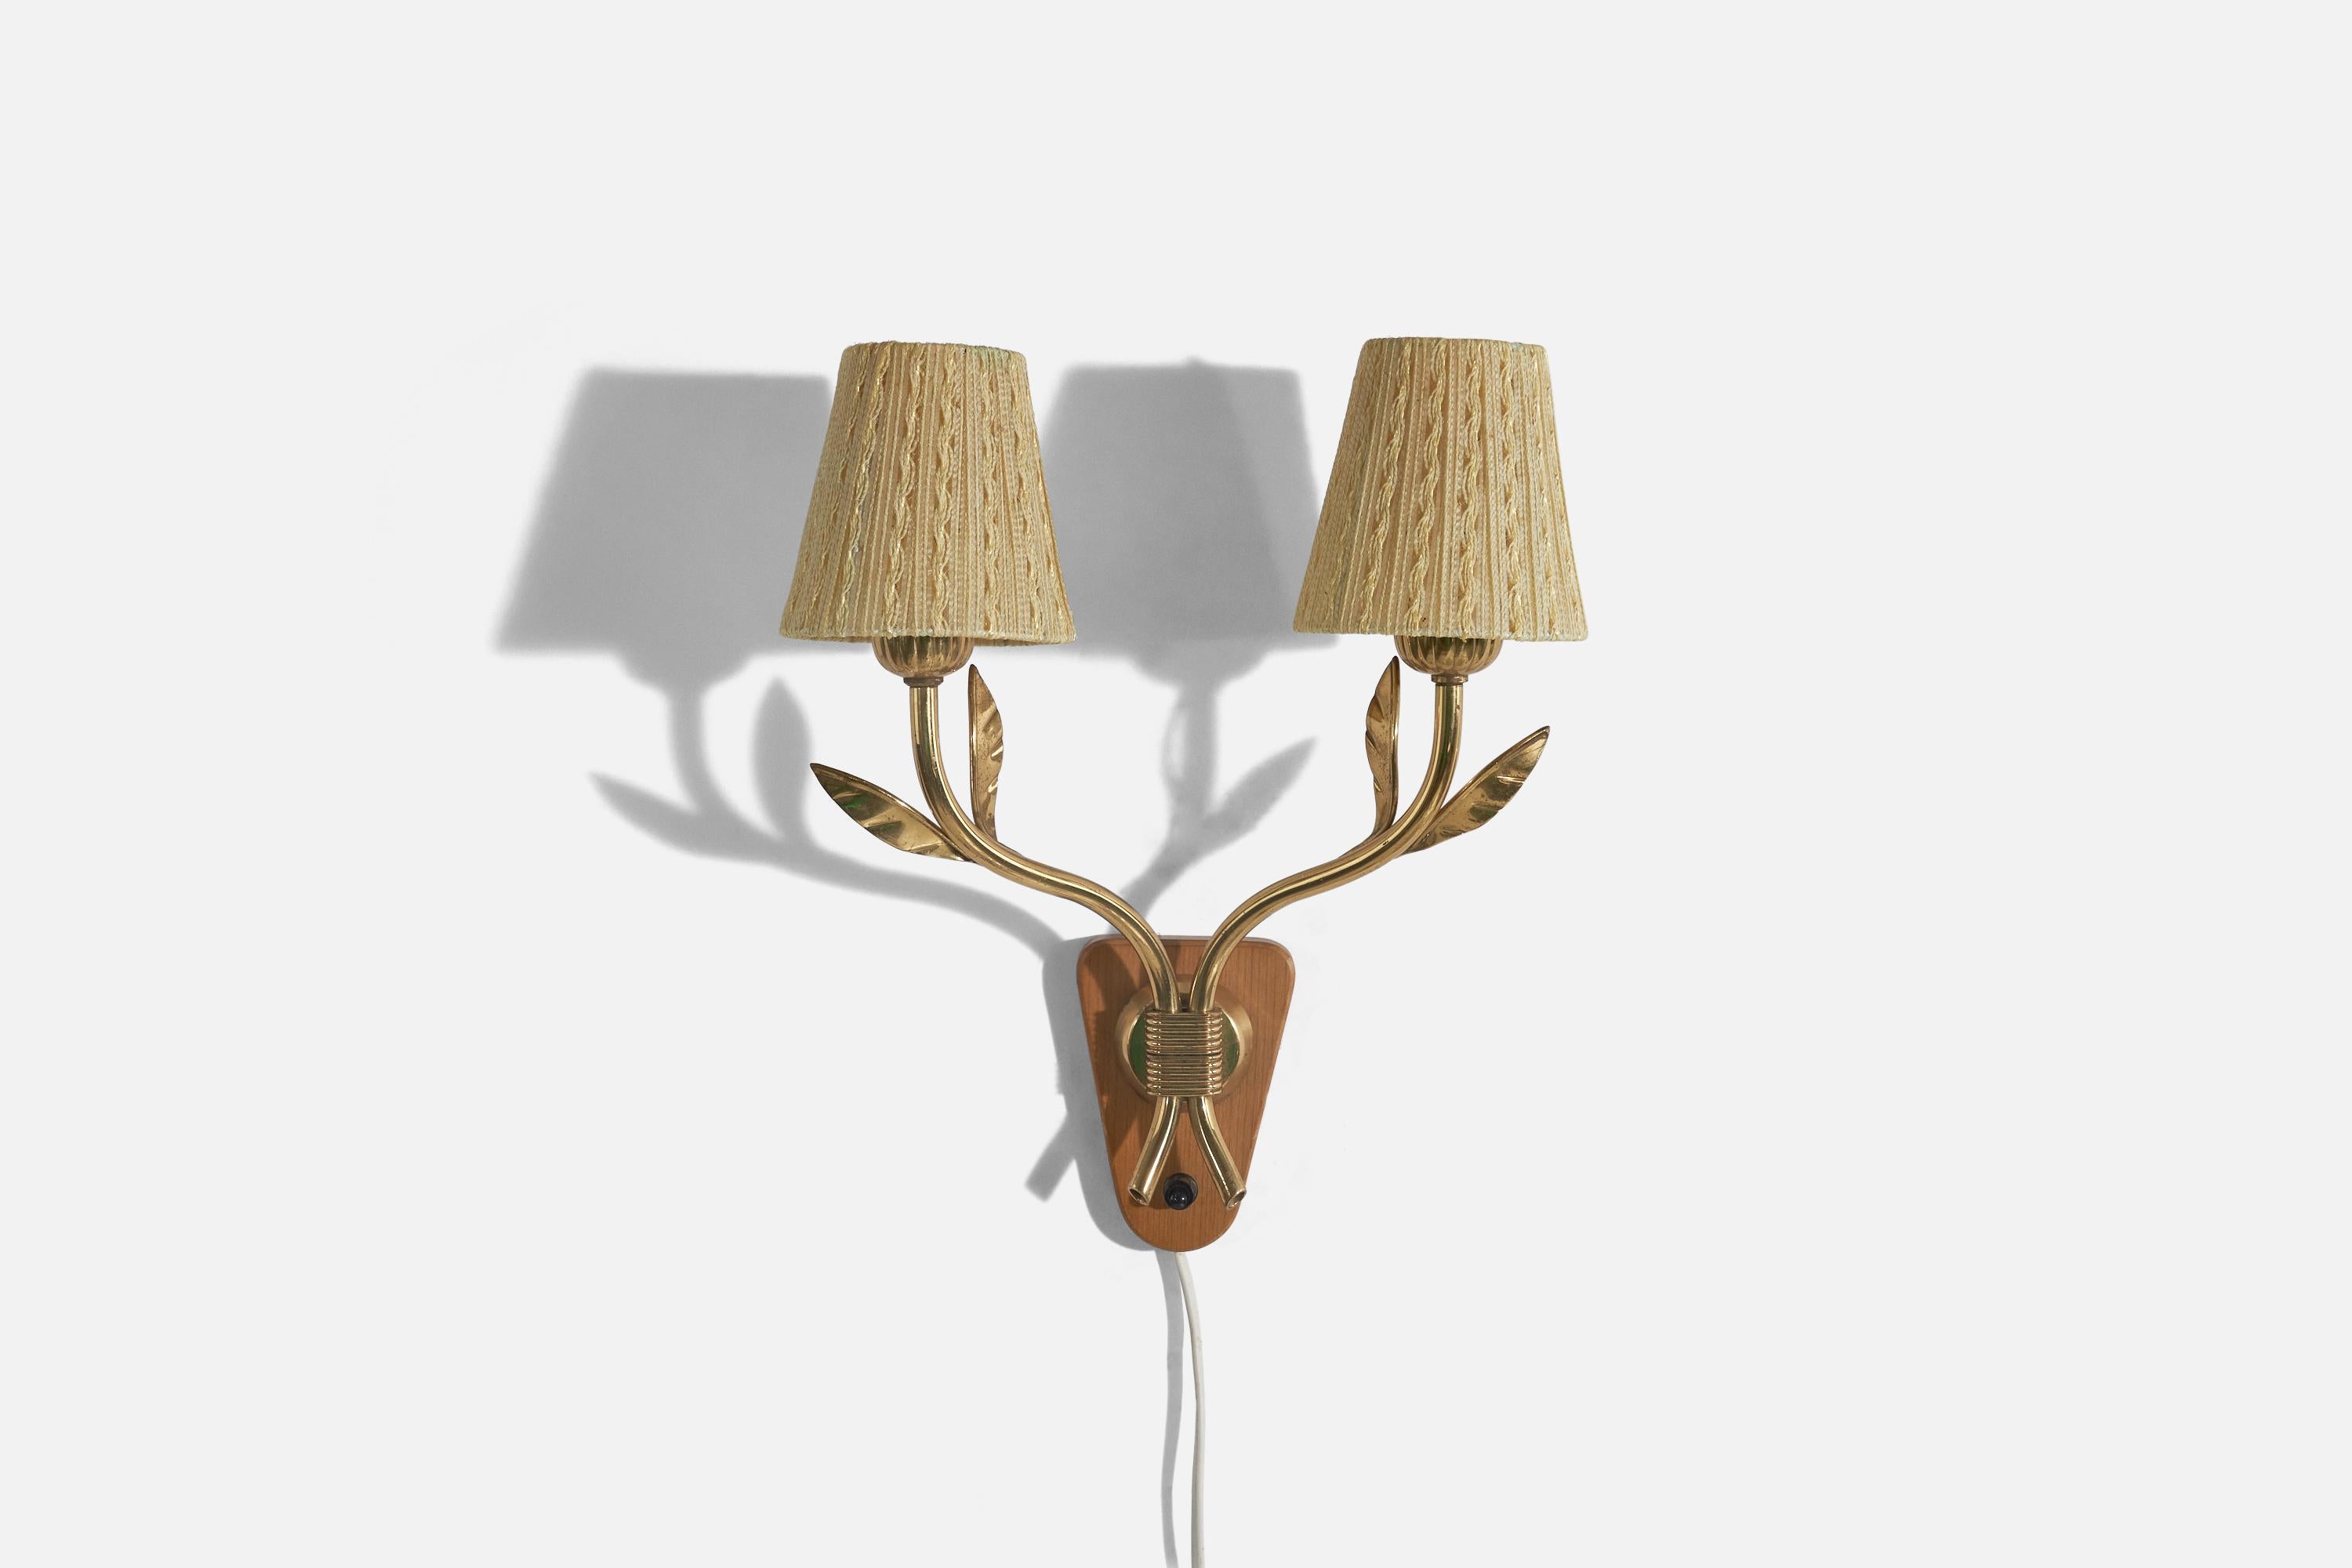 A brass, wood and fabric wall light designed and produced in Sweden, c. 1940s.

Sold with Lampshade. 
Stated dimensions refer to the Sconce with the Shade.
Dimensions of back plate (inches) : 4.7 x 4.7 x 1.12 (H x W x D).